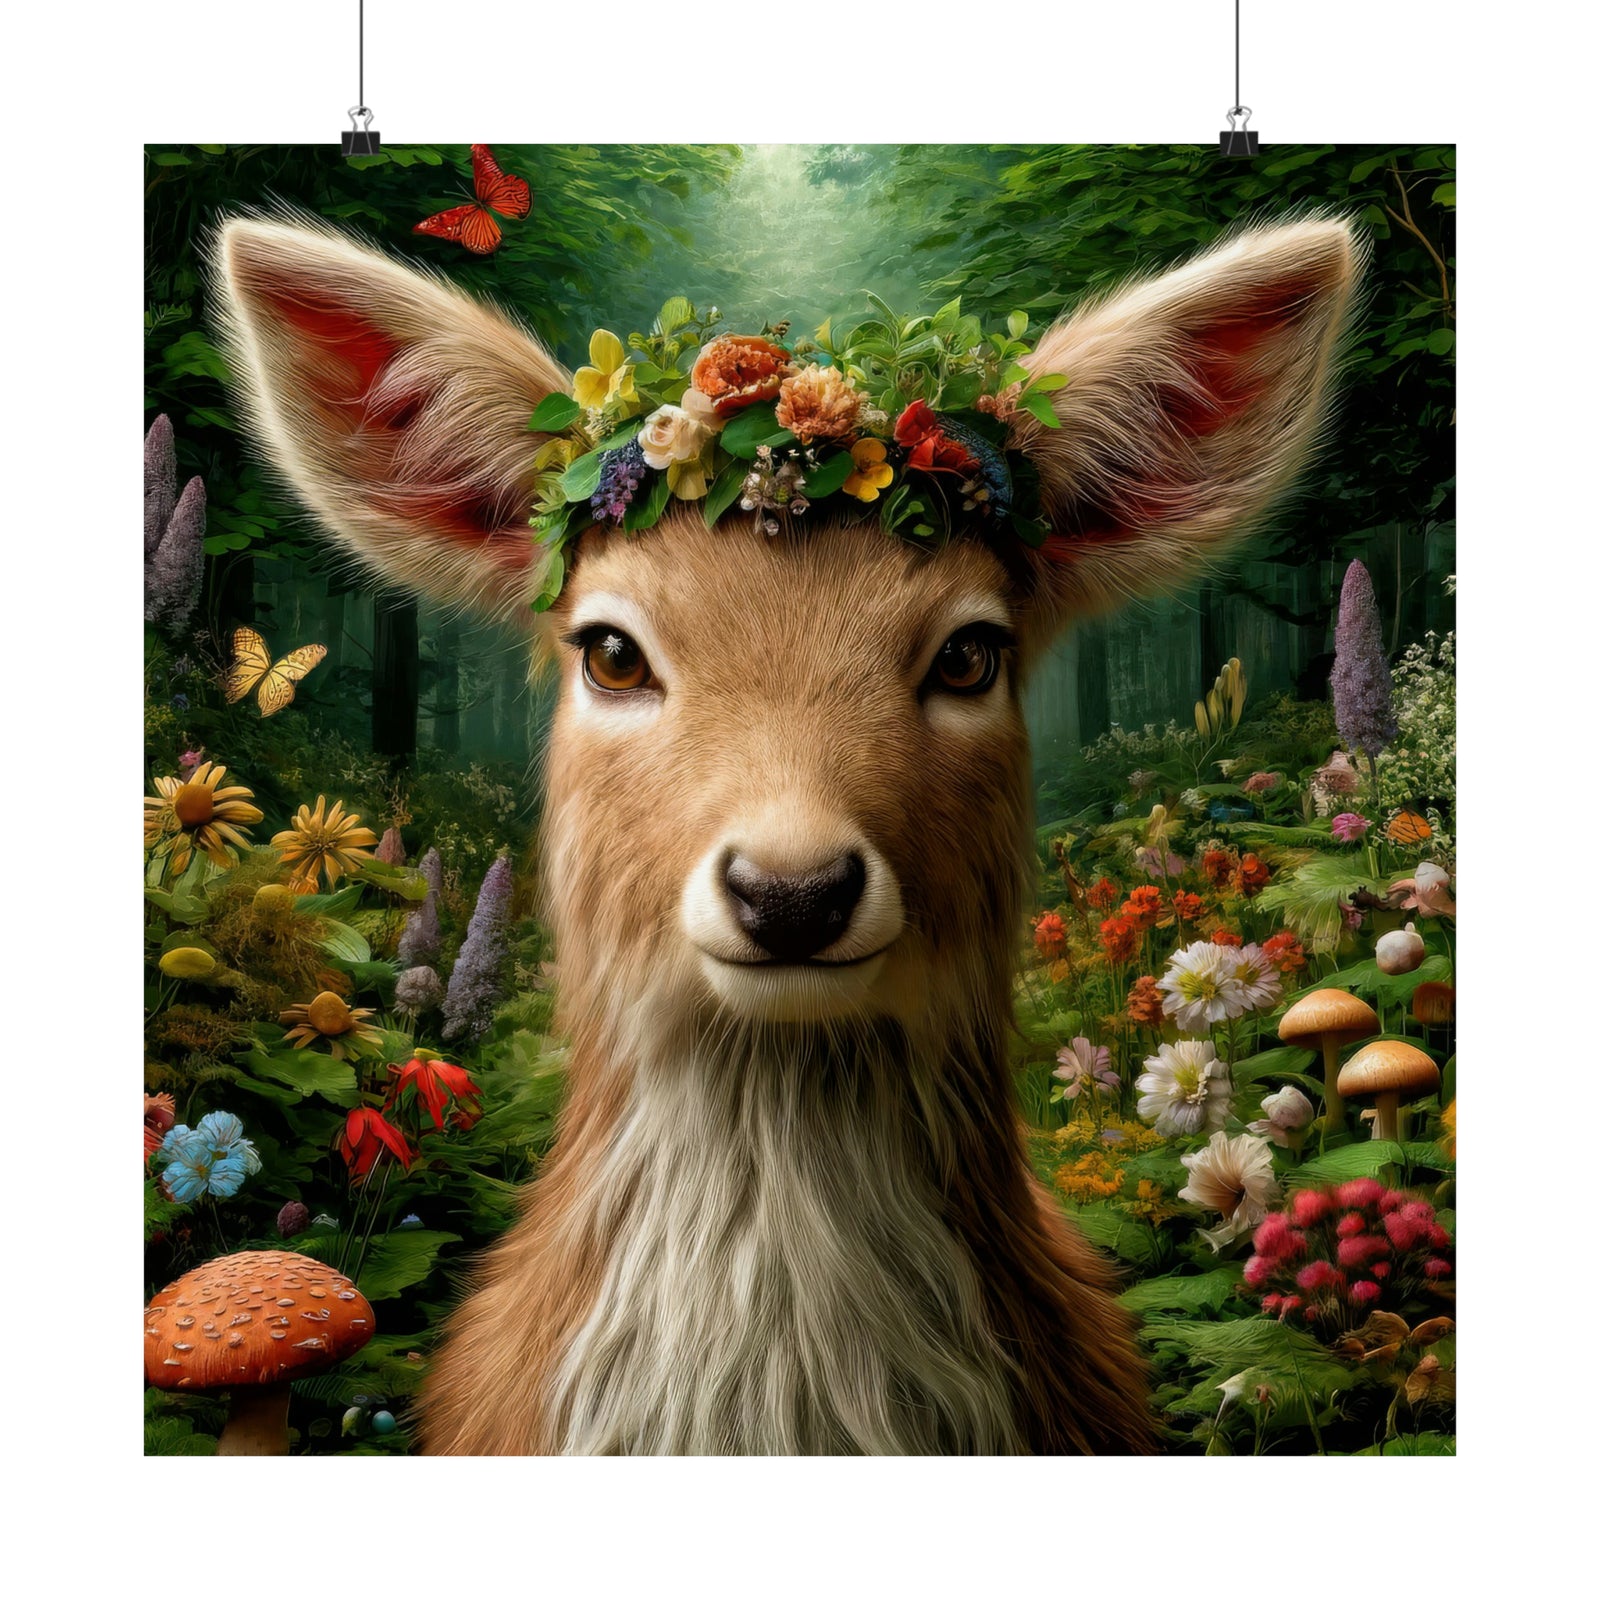 Halo floral de Forest Fawn Poster